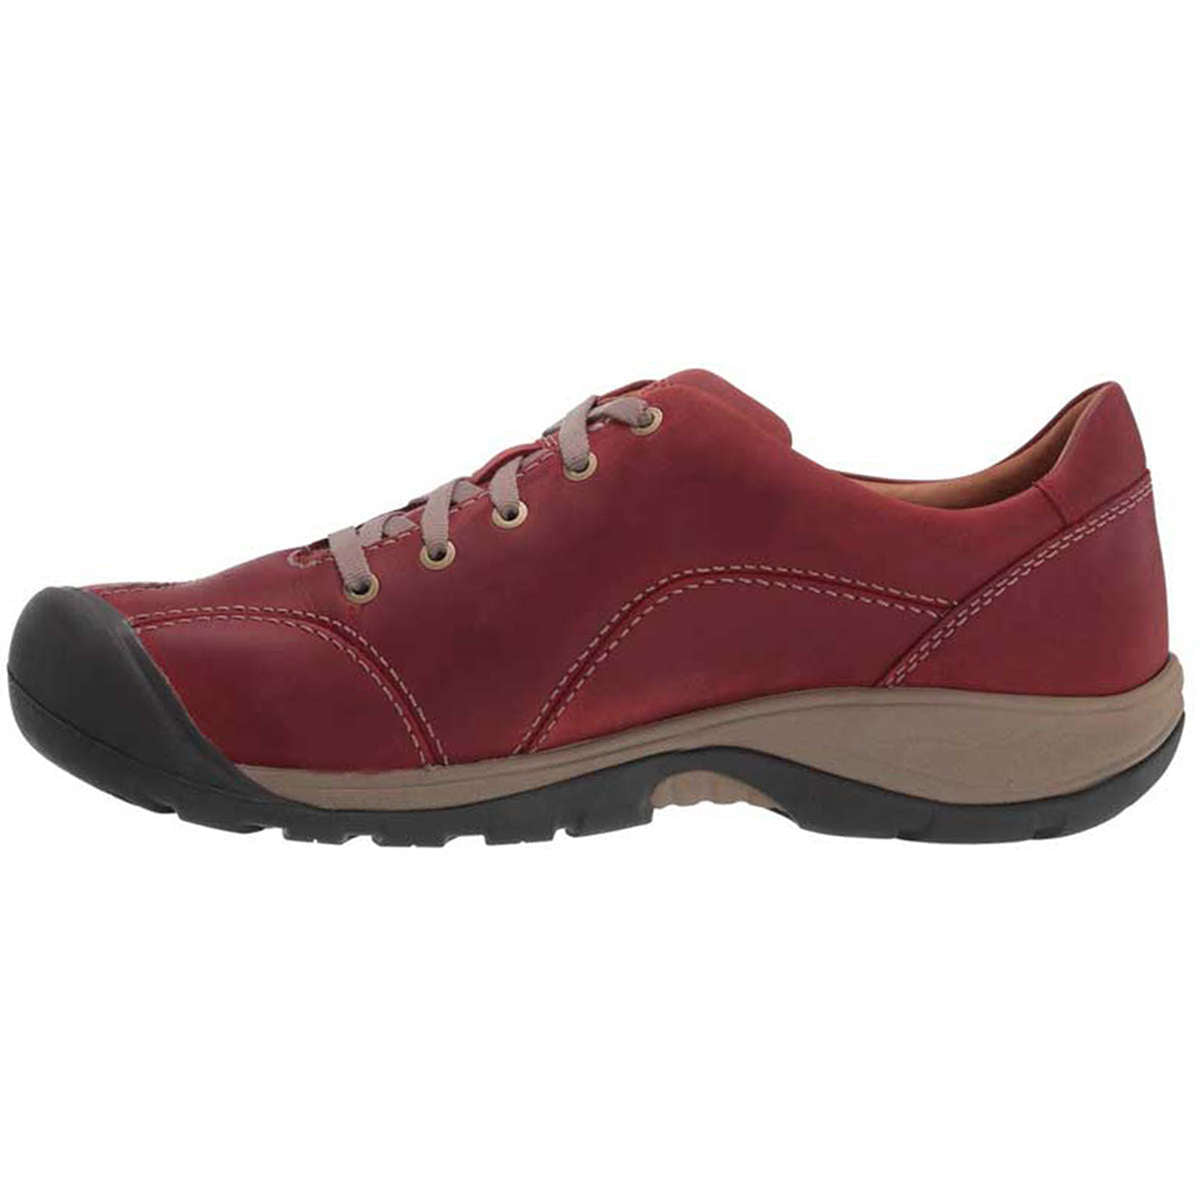 Keen Presidio II Leather Women's Casual Trainers#color_red dahlia brindle